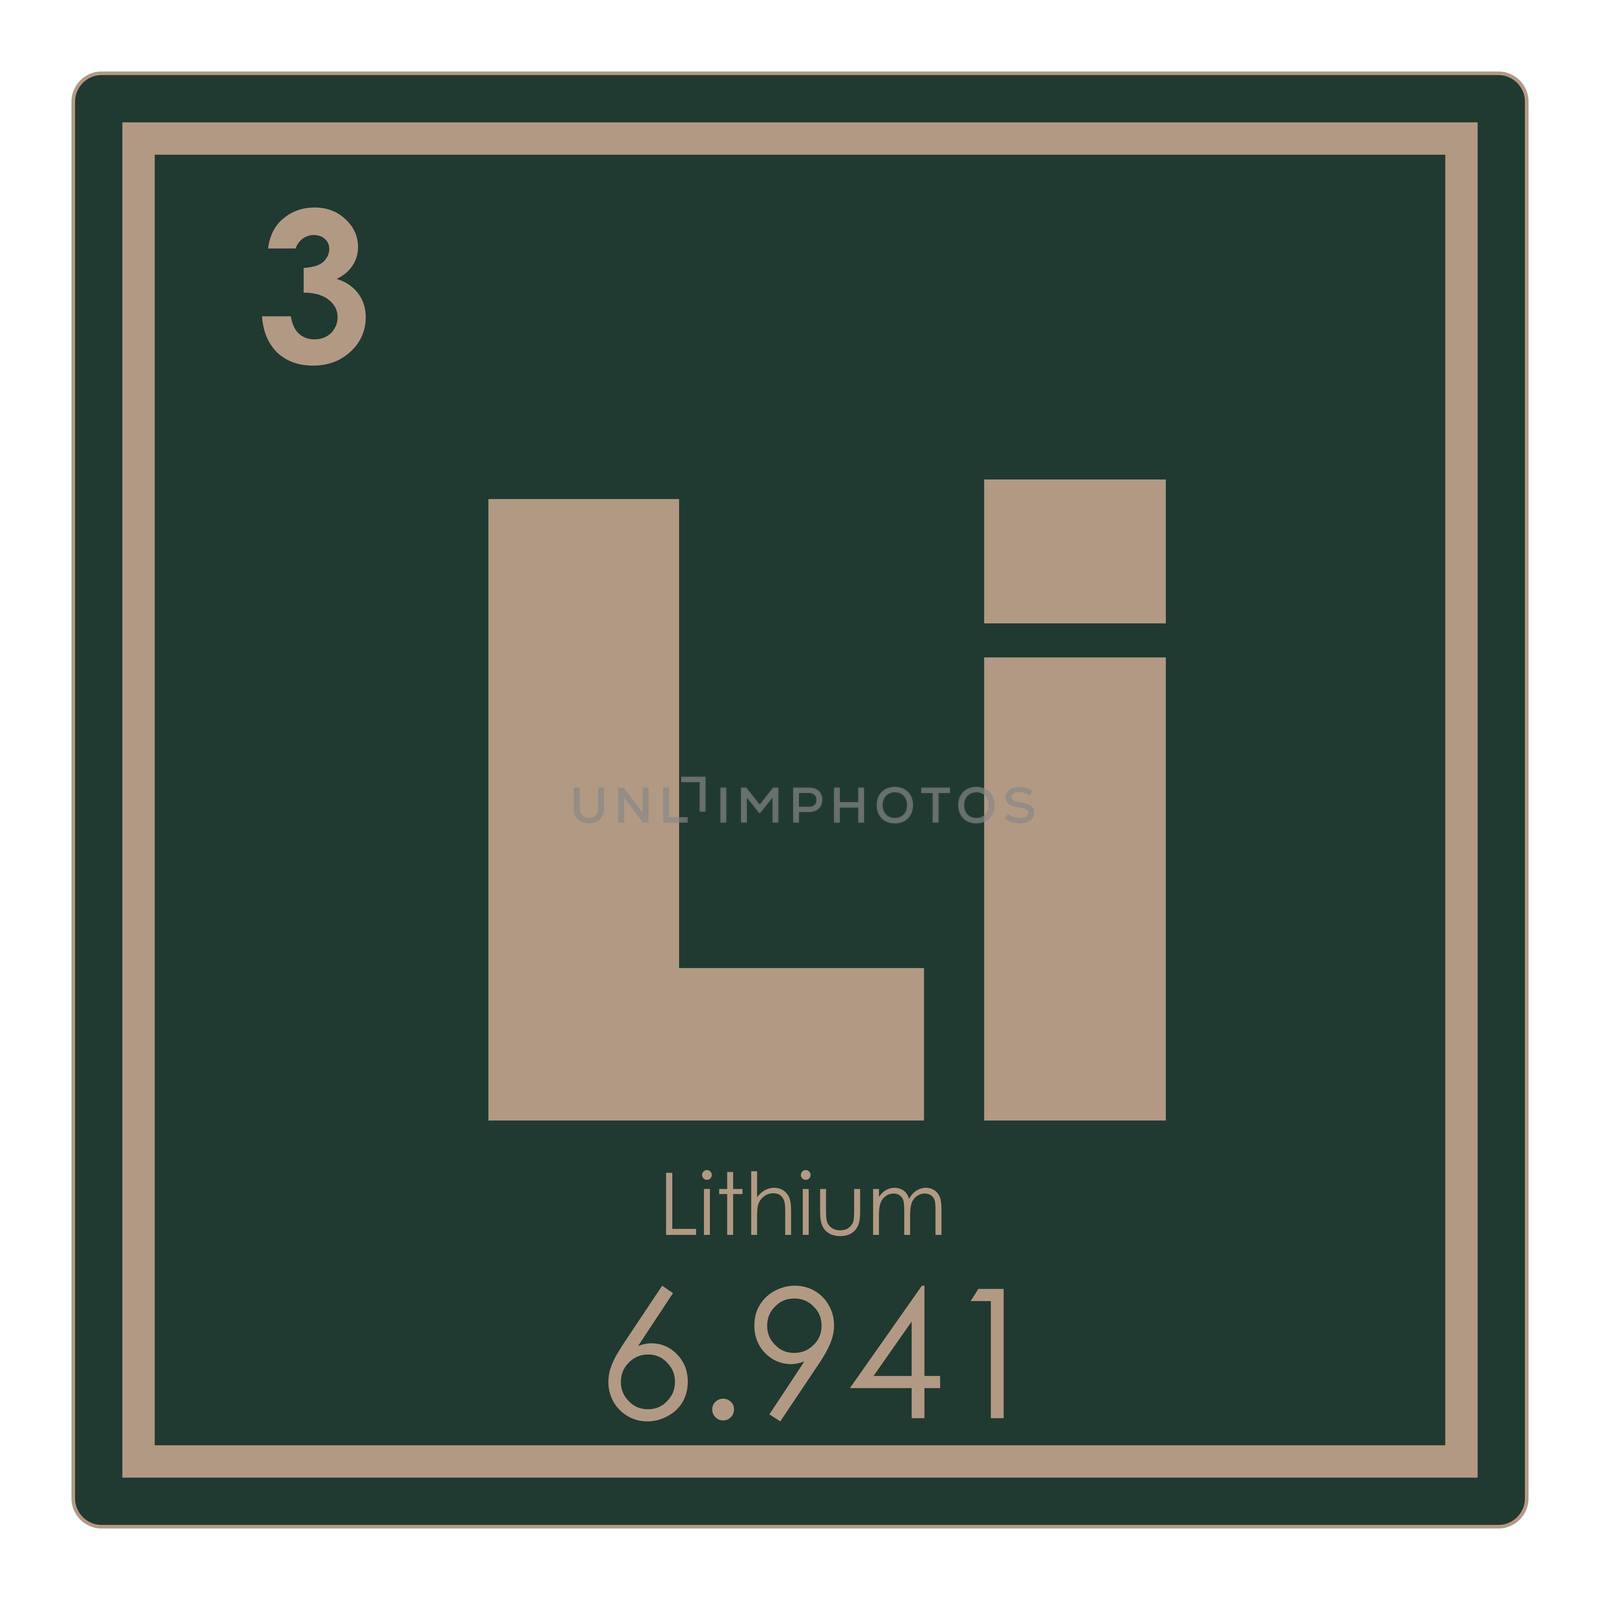 Lithium chemical element by tony4urban